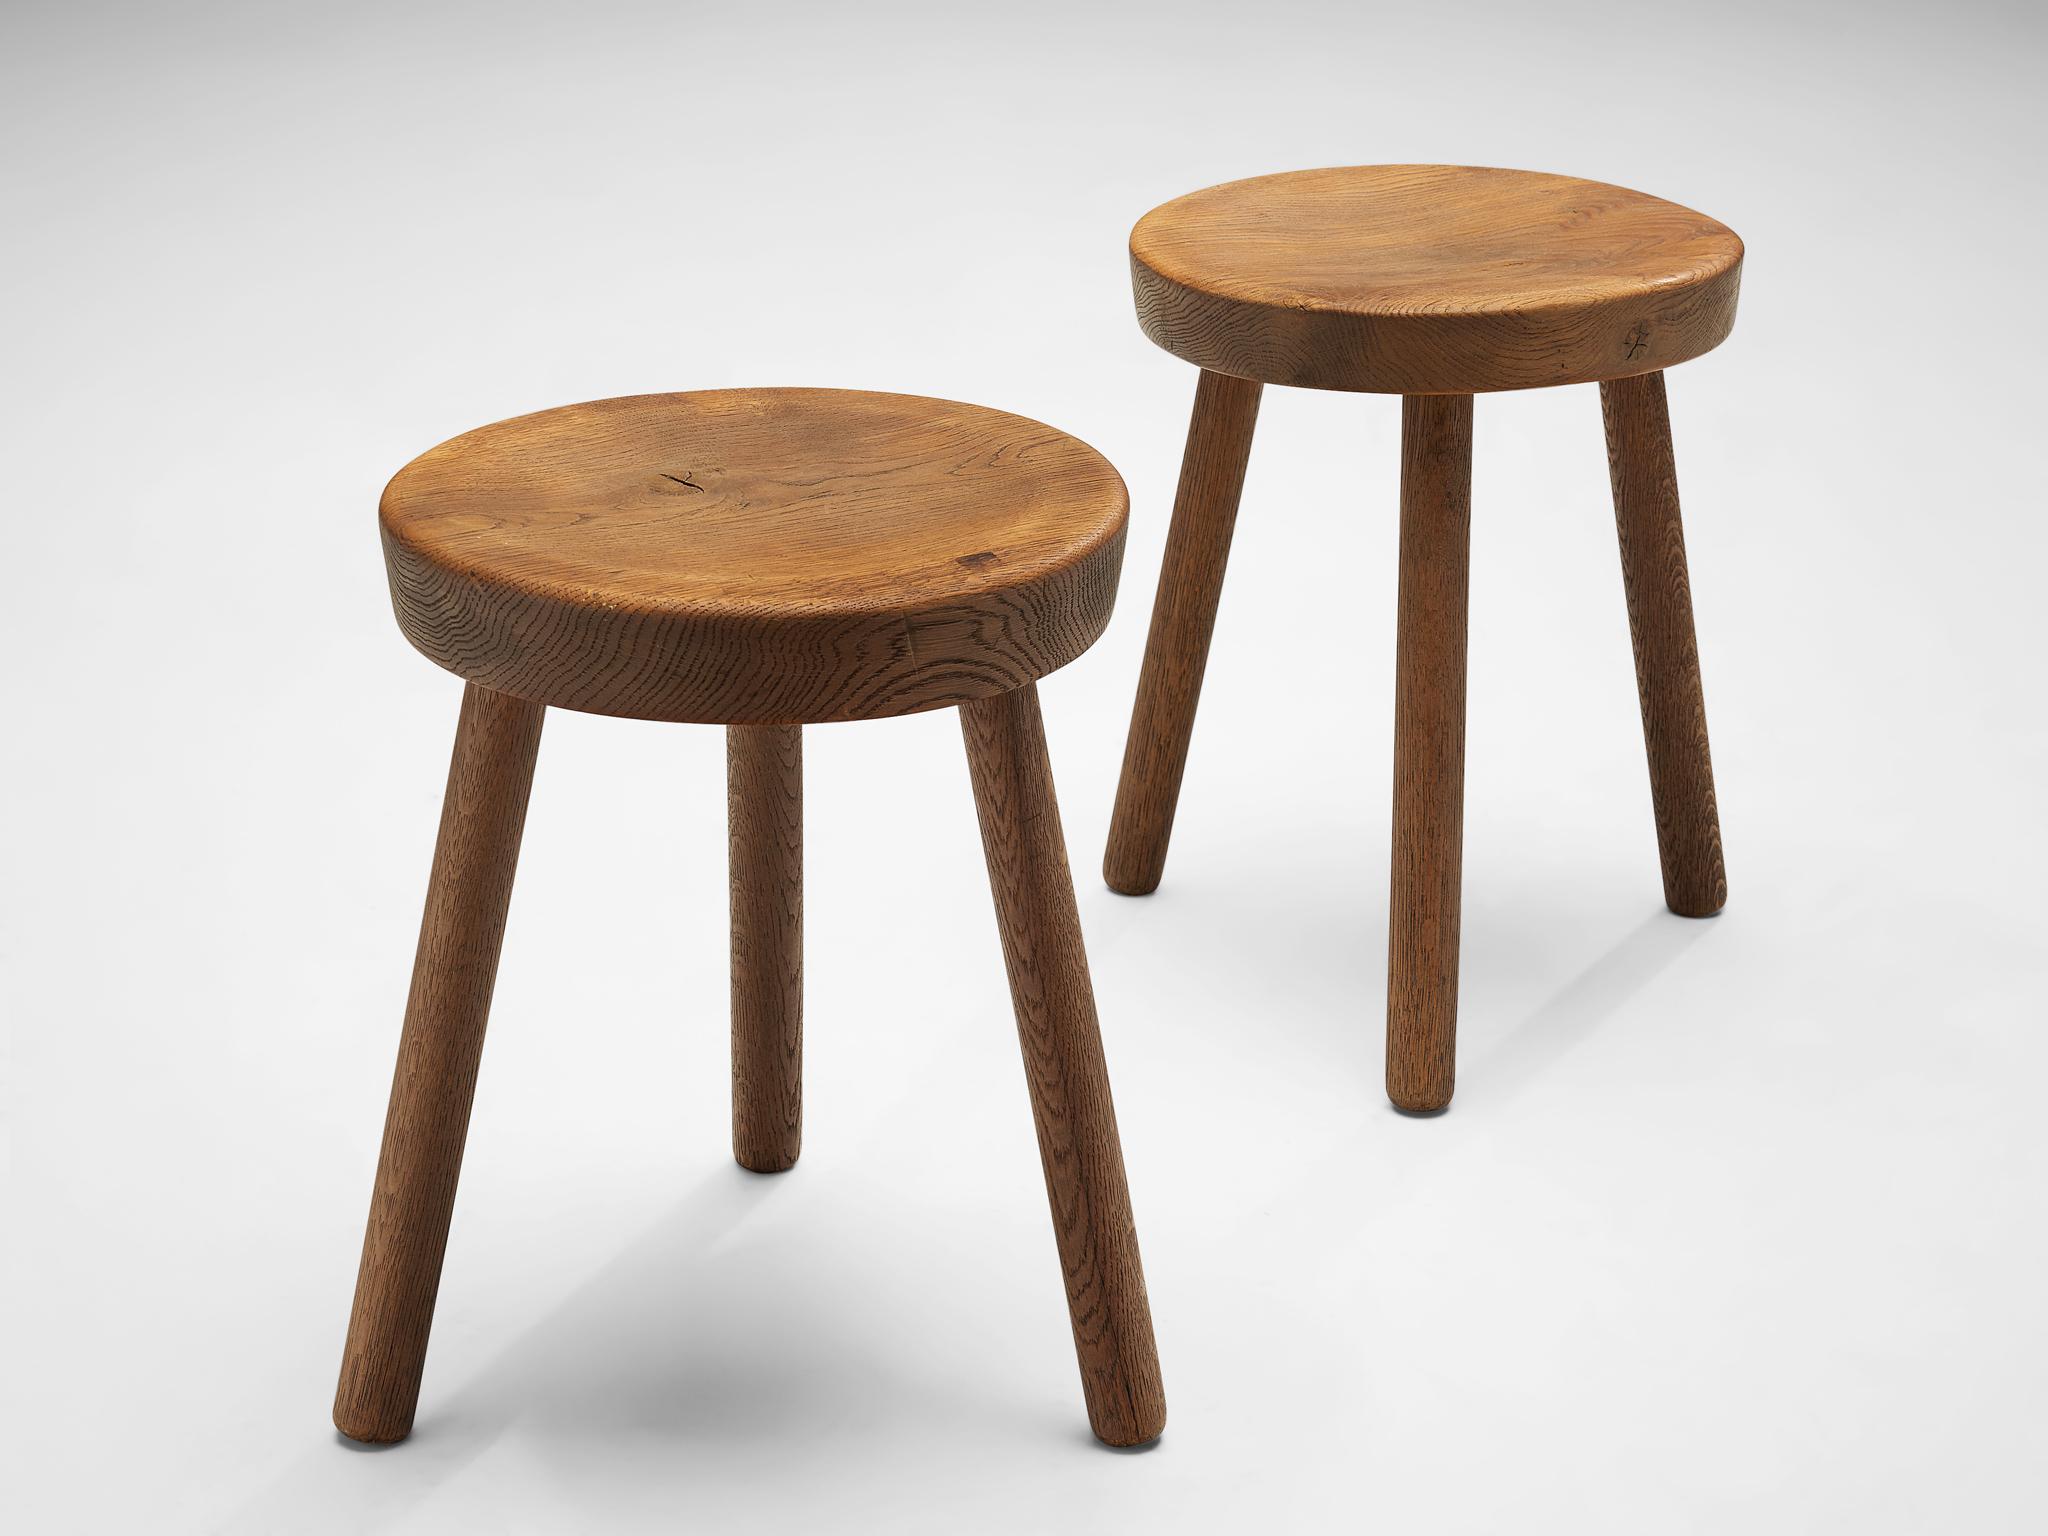 Large set of tripod stools or side tables, solid oak, Switzerland, 1960s-1970s.

Beautiful crafted oak stools originating from the exhibition center in St. Gallen, Switzerland. The seat is handcrafted to have a small dip for better comfort.  Great